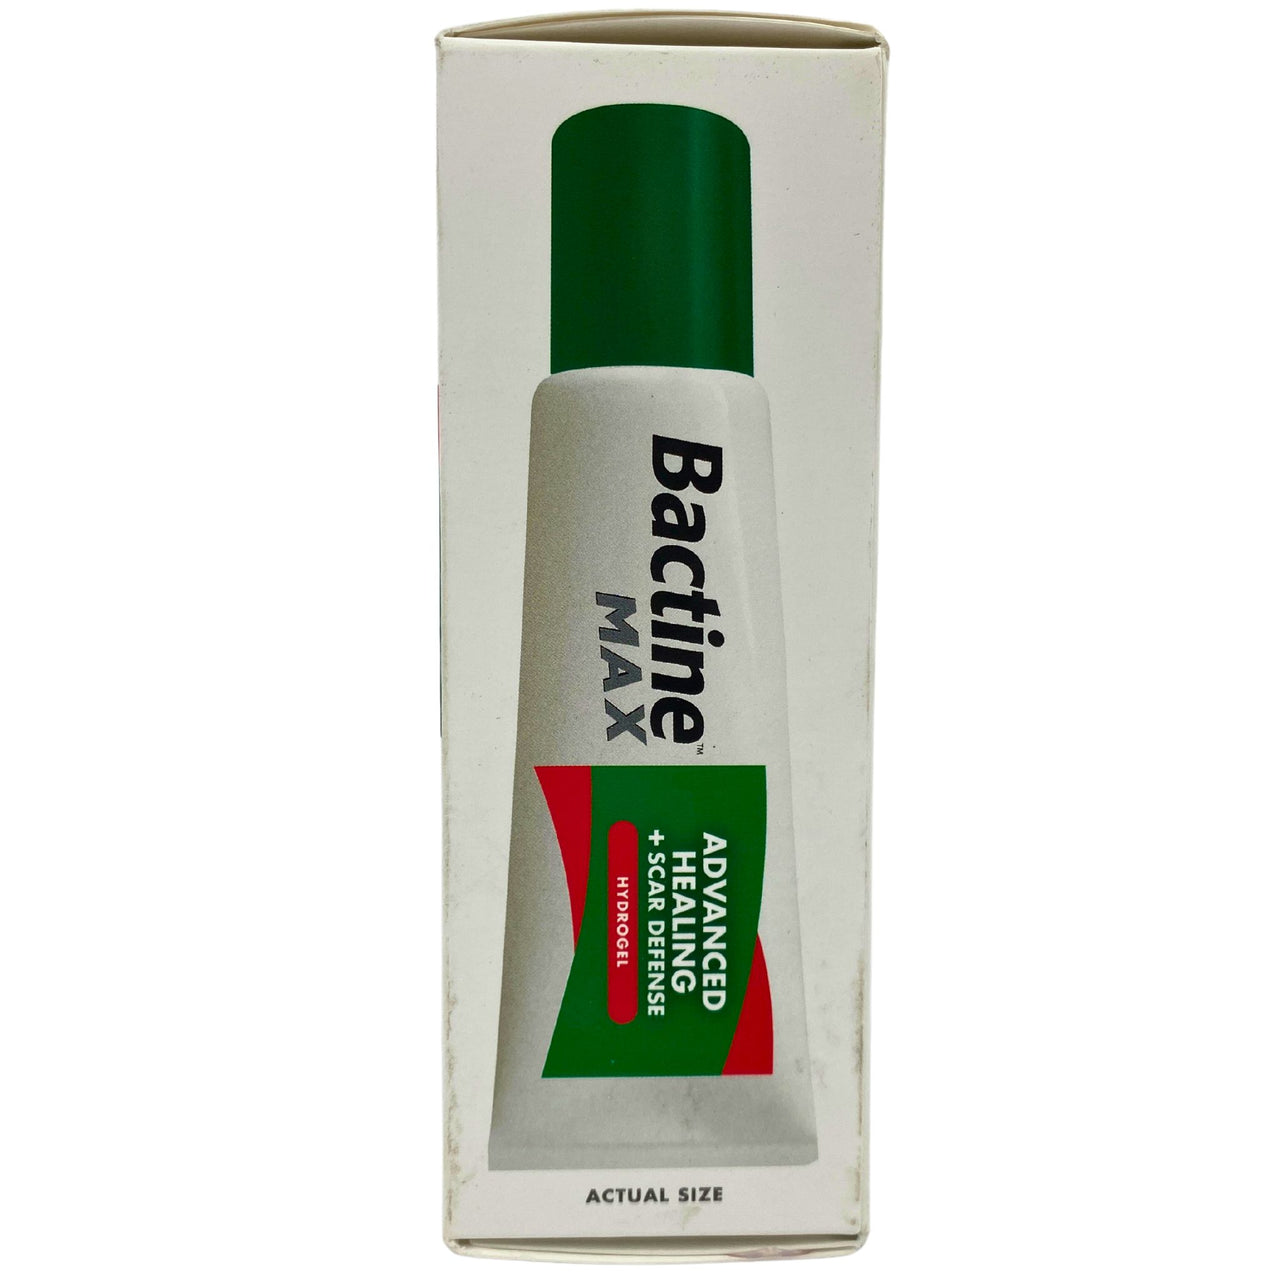 Bactine Max Advanced Healing + Scar Defense Hydrogel no sting dries in seconds